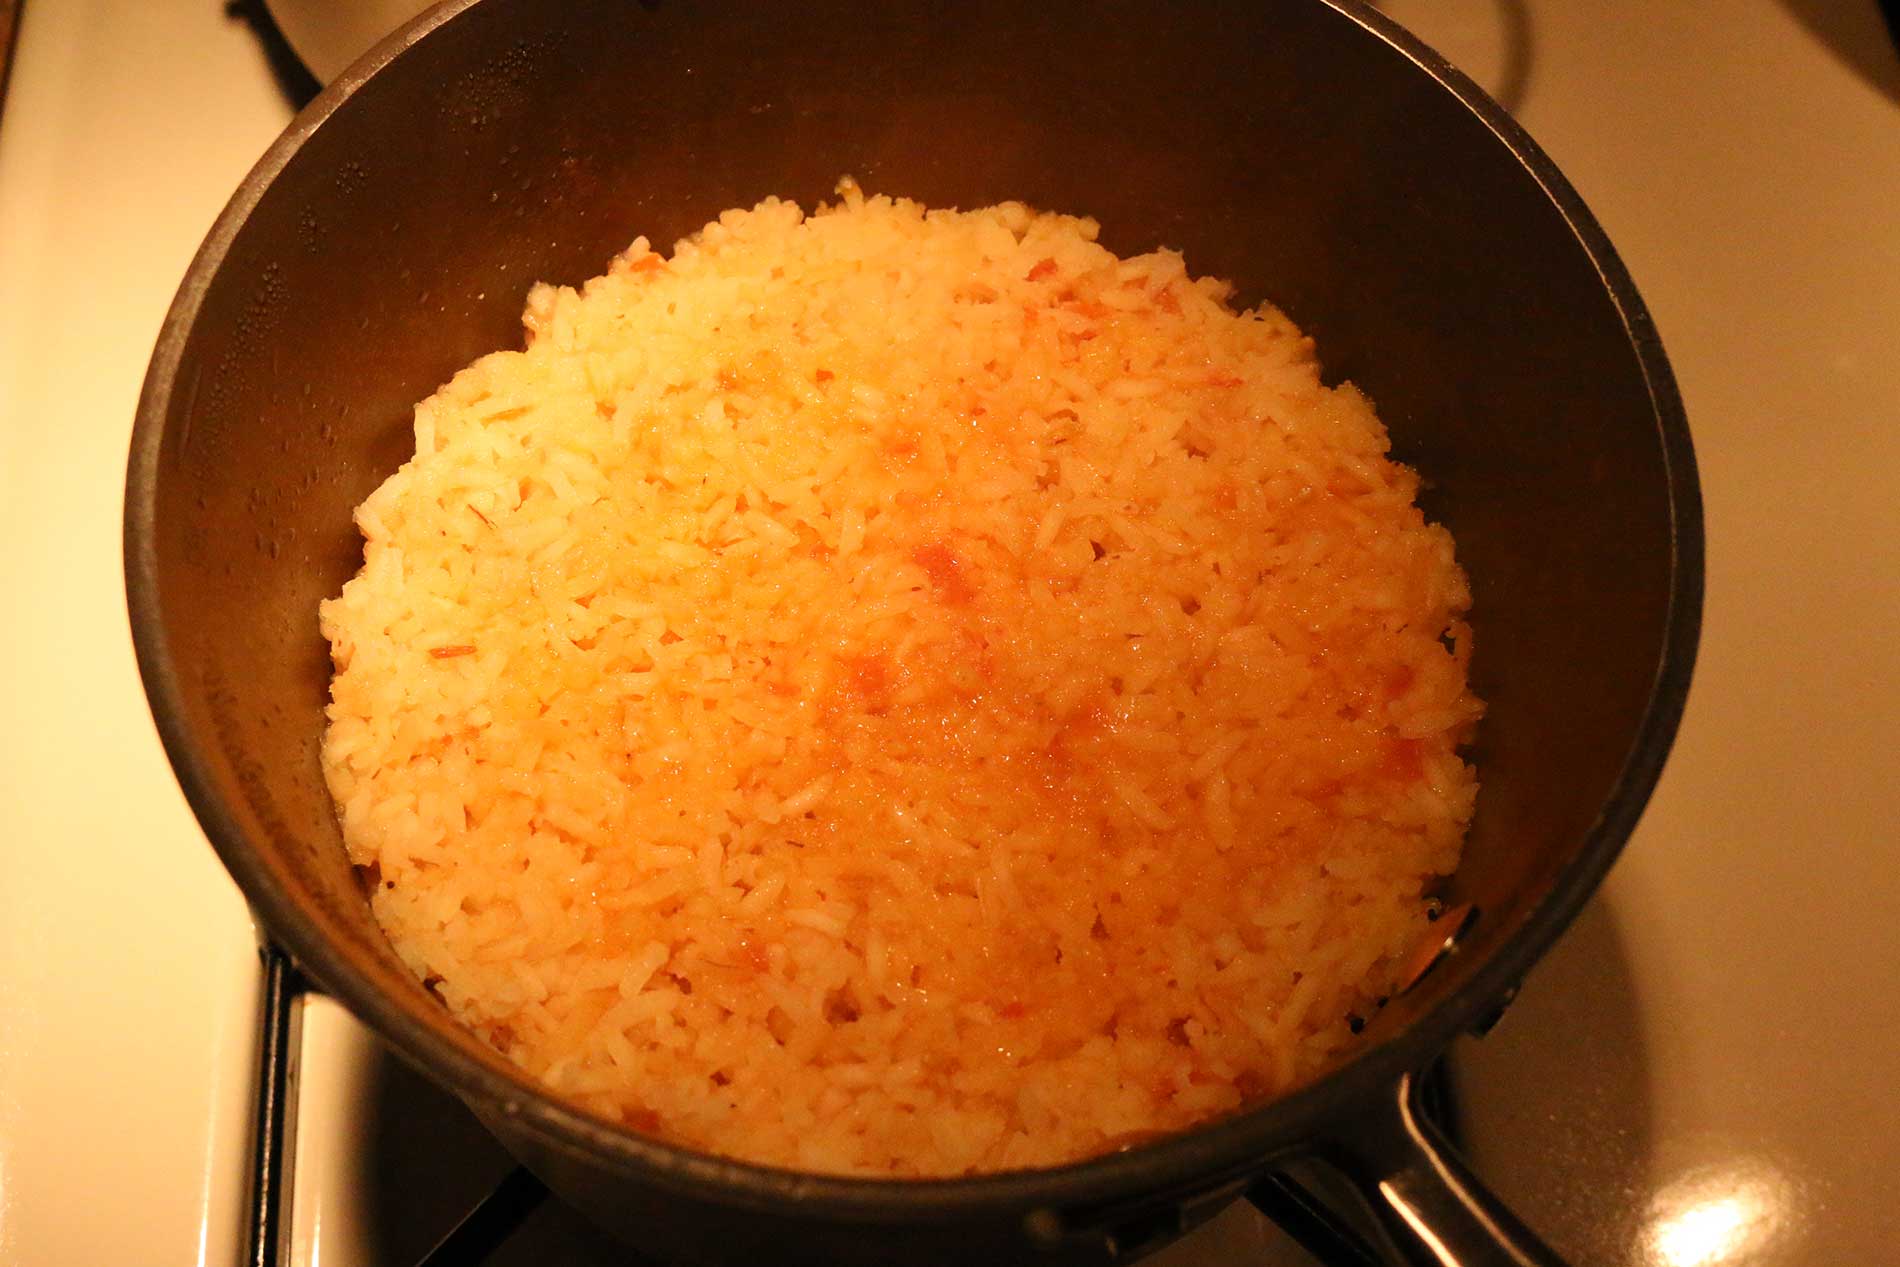 The finished white rice and tomato blend